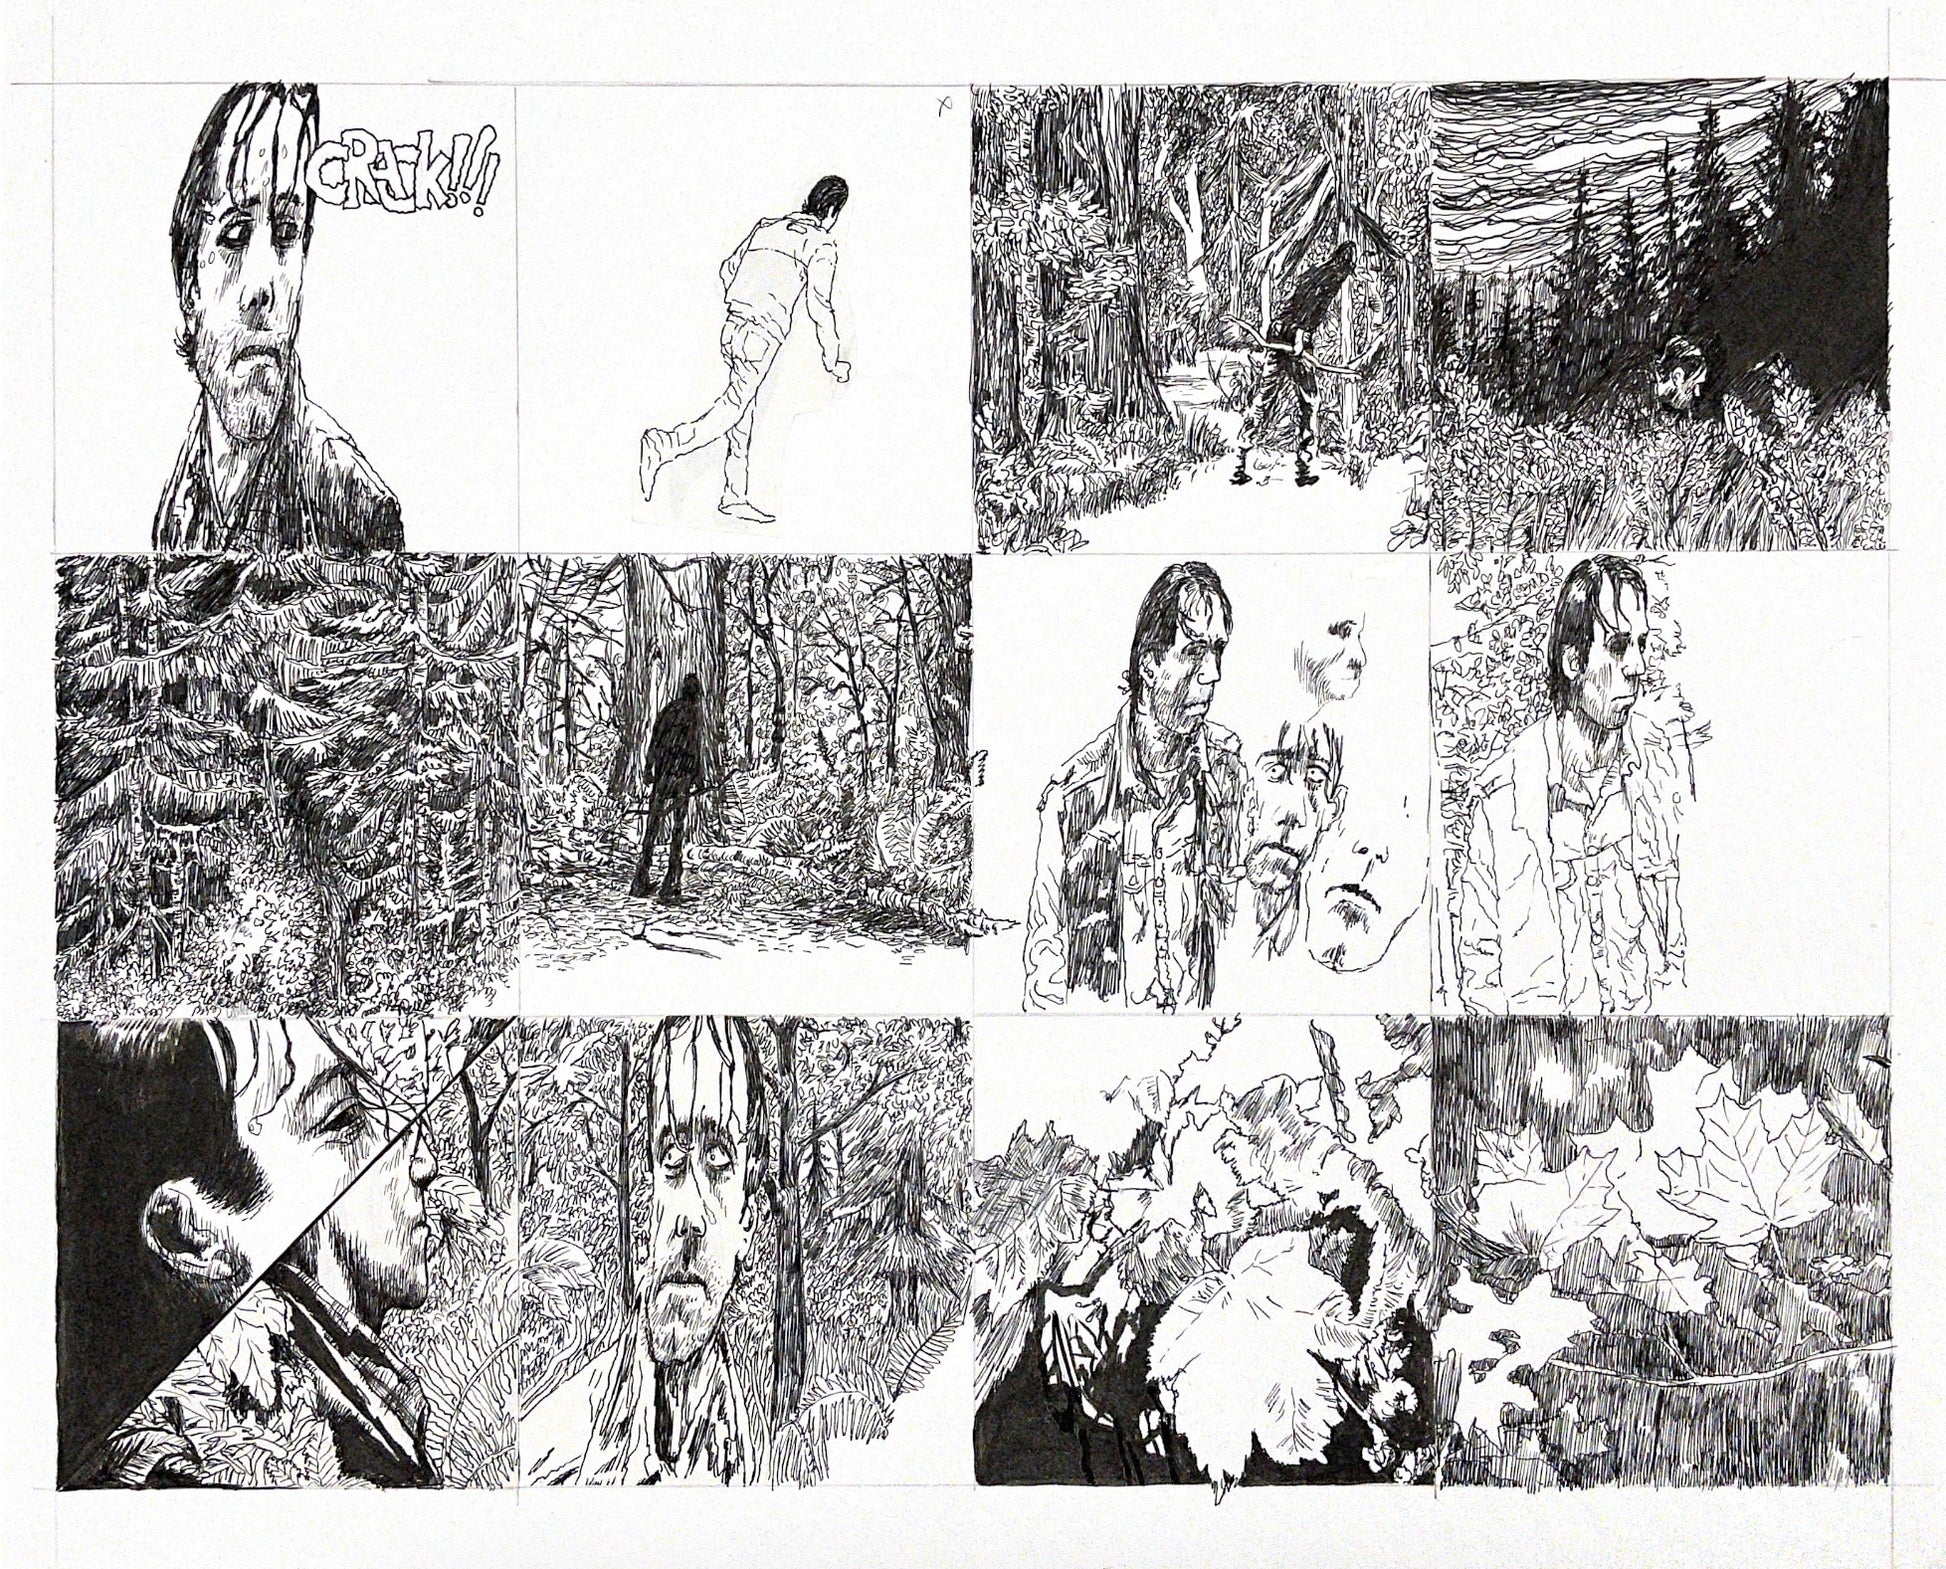 Graphic novel panels, featuring ink drawings, disoriented people, woods, leaves and movement.